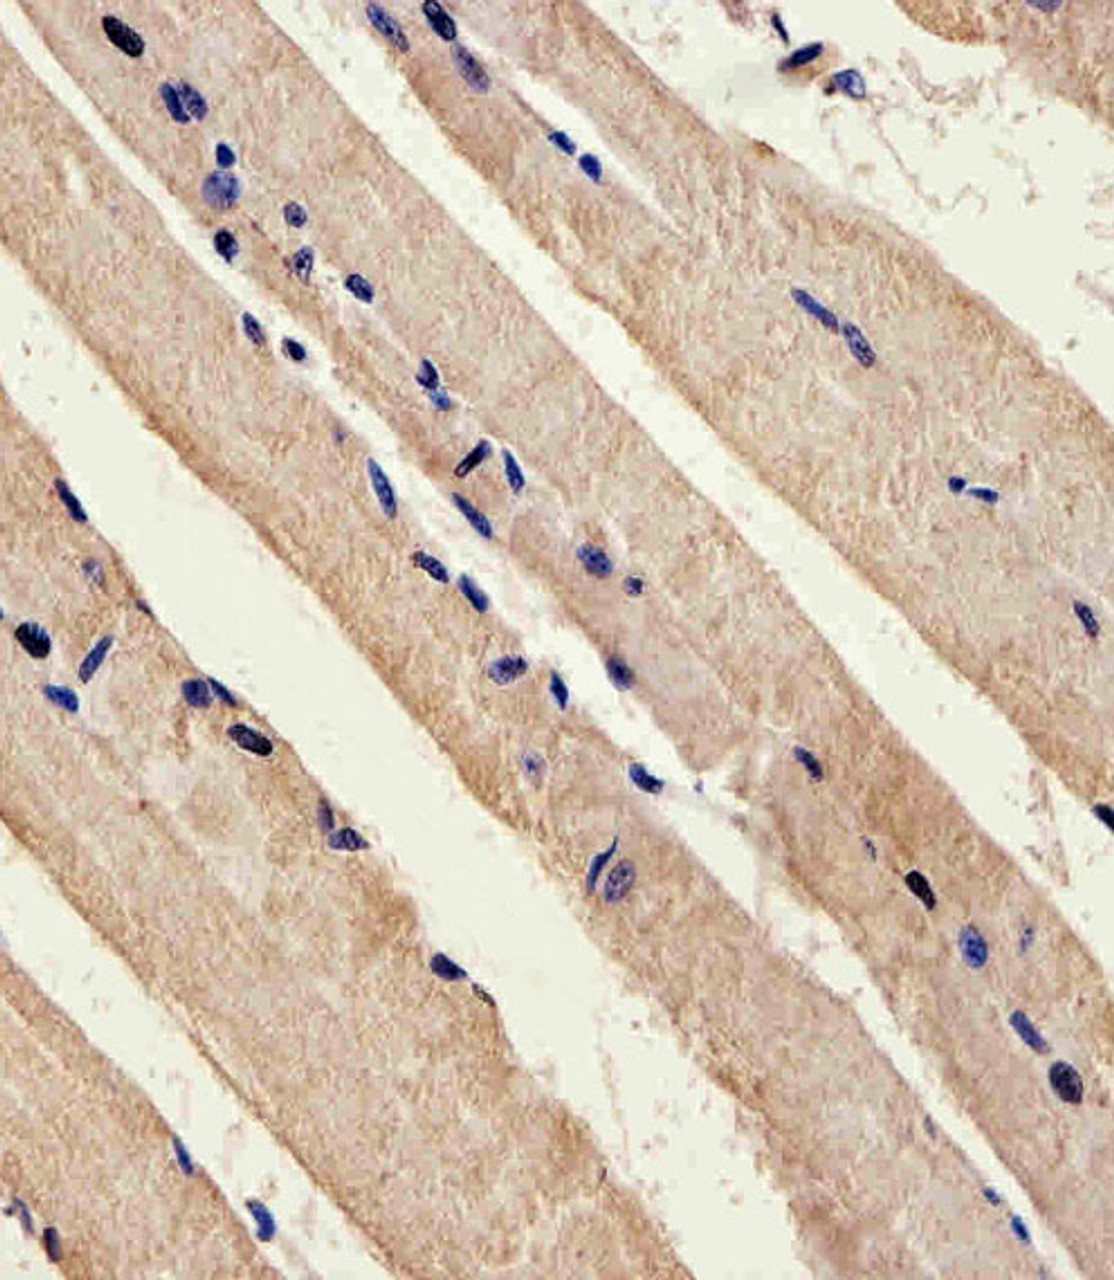 Immunohistochemical analysis of paraffin-embedded M.skeletal muscle section using Mouse Stk11 Antibody . Antibody was diluted at 1:25 dilution. A peroxidase-conjugated goat anti-rabbit IgG at 1:400 dilution was used as the secondary antibody, followed by DAB staining.